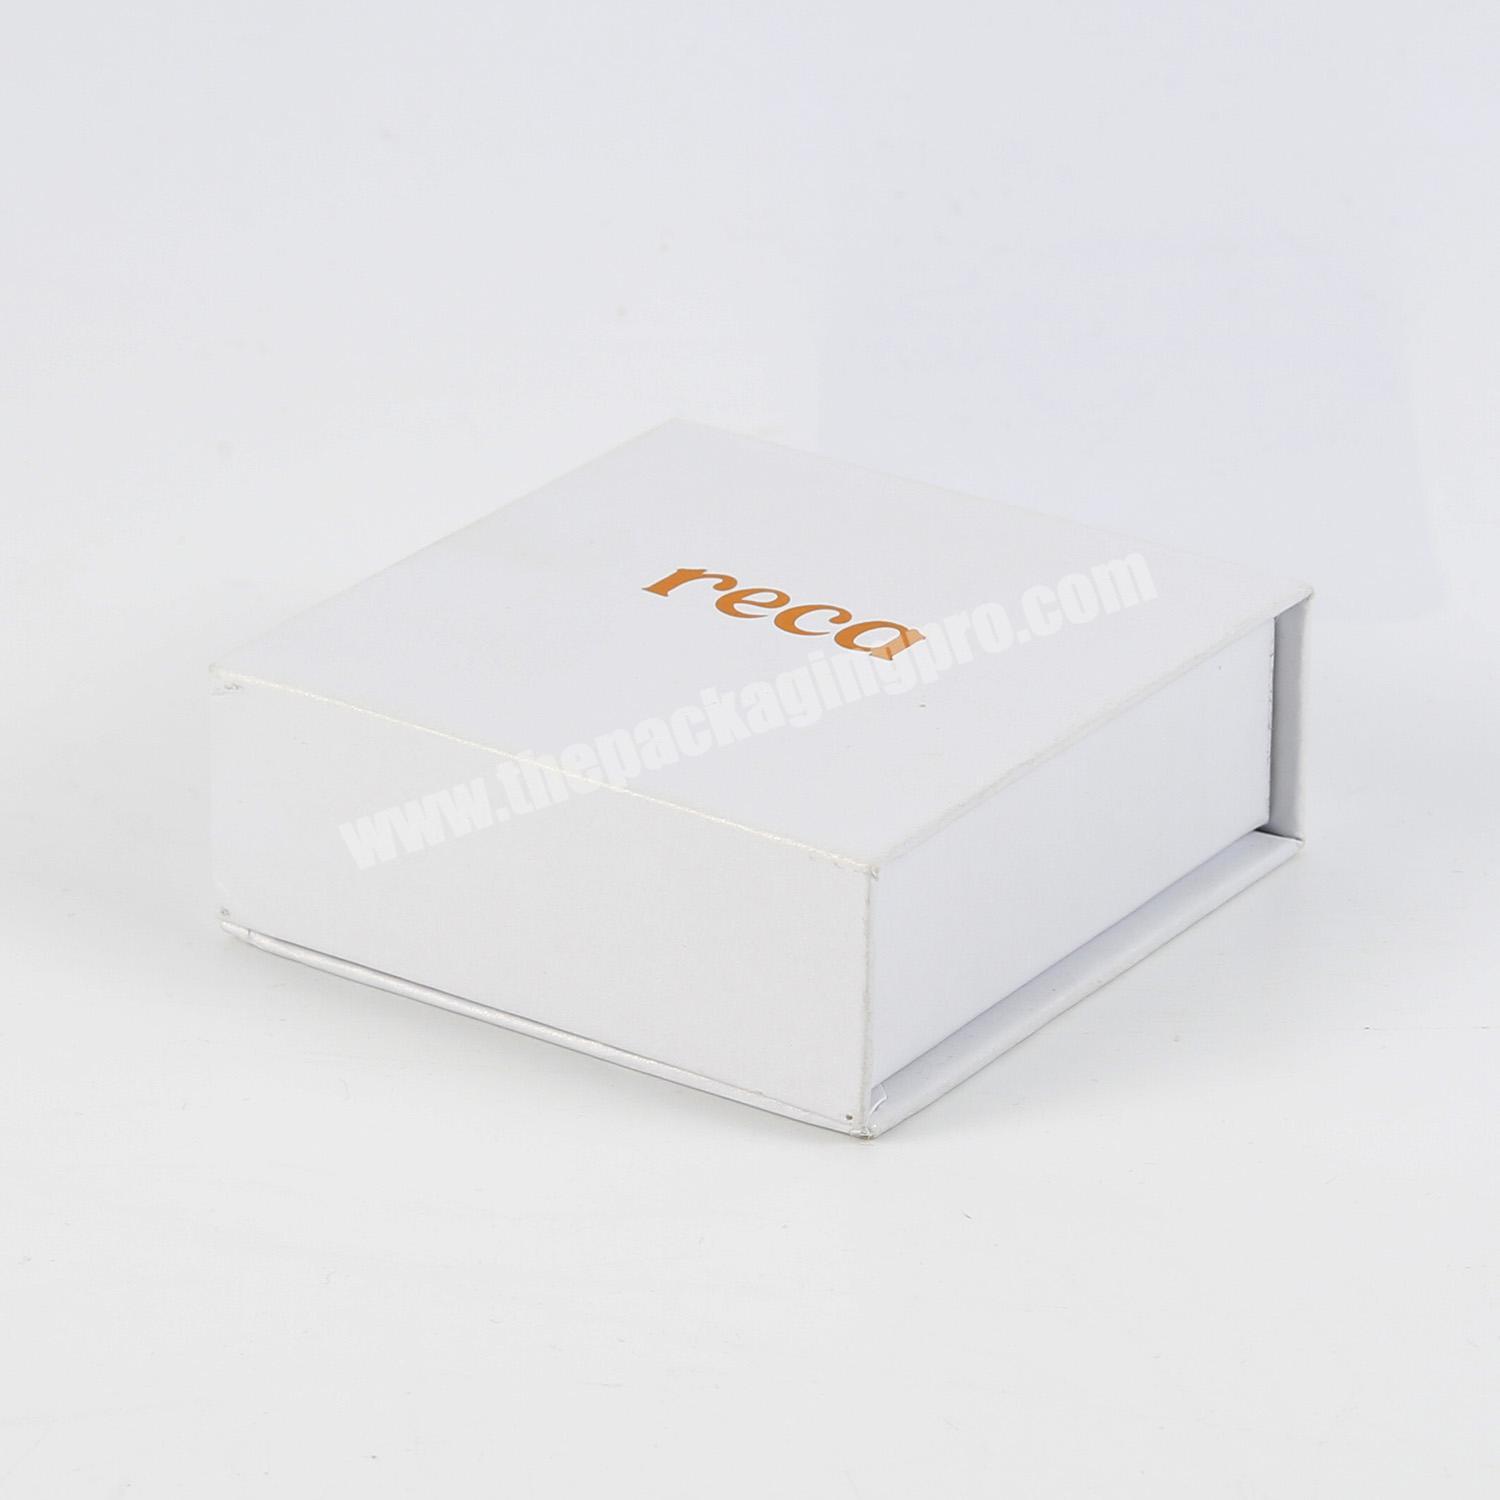 Custom Jewelry Packaging Puch and Box  Packaging Cardboard Box with Microfiber Jewelry Pouch